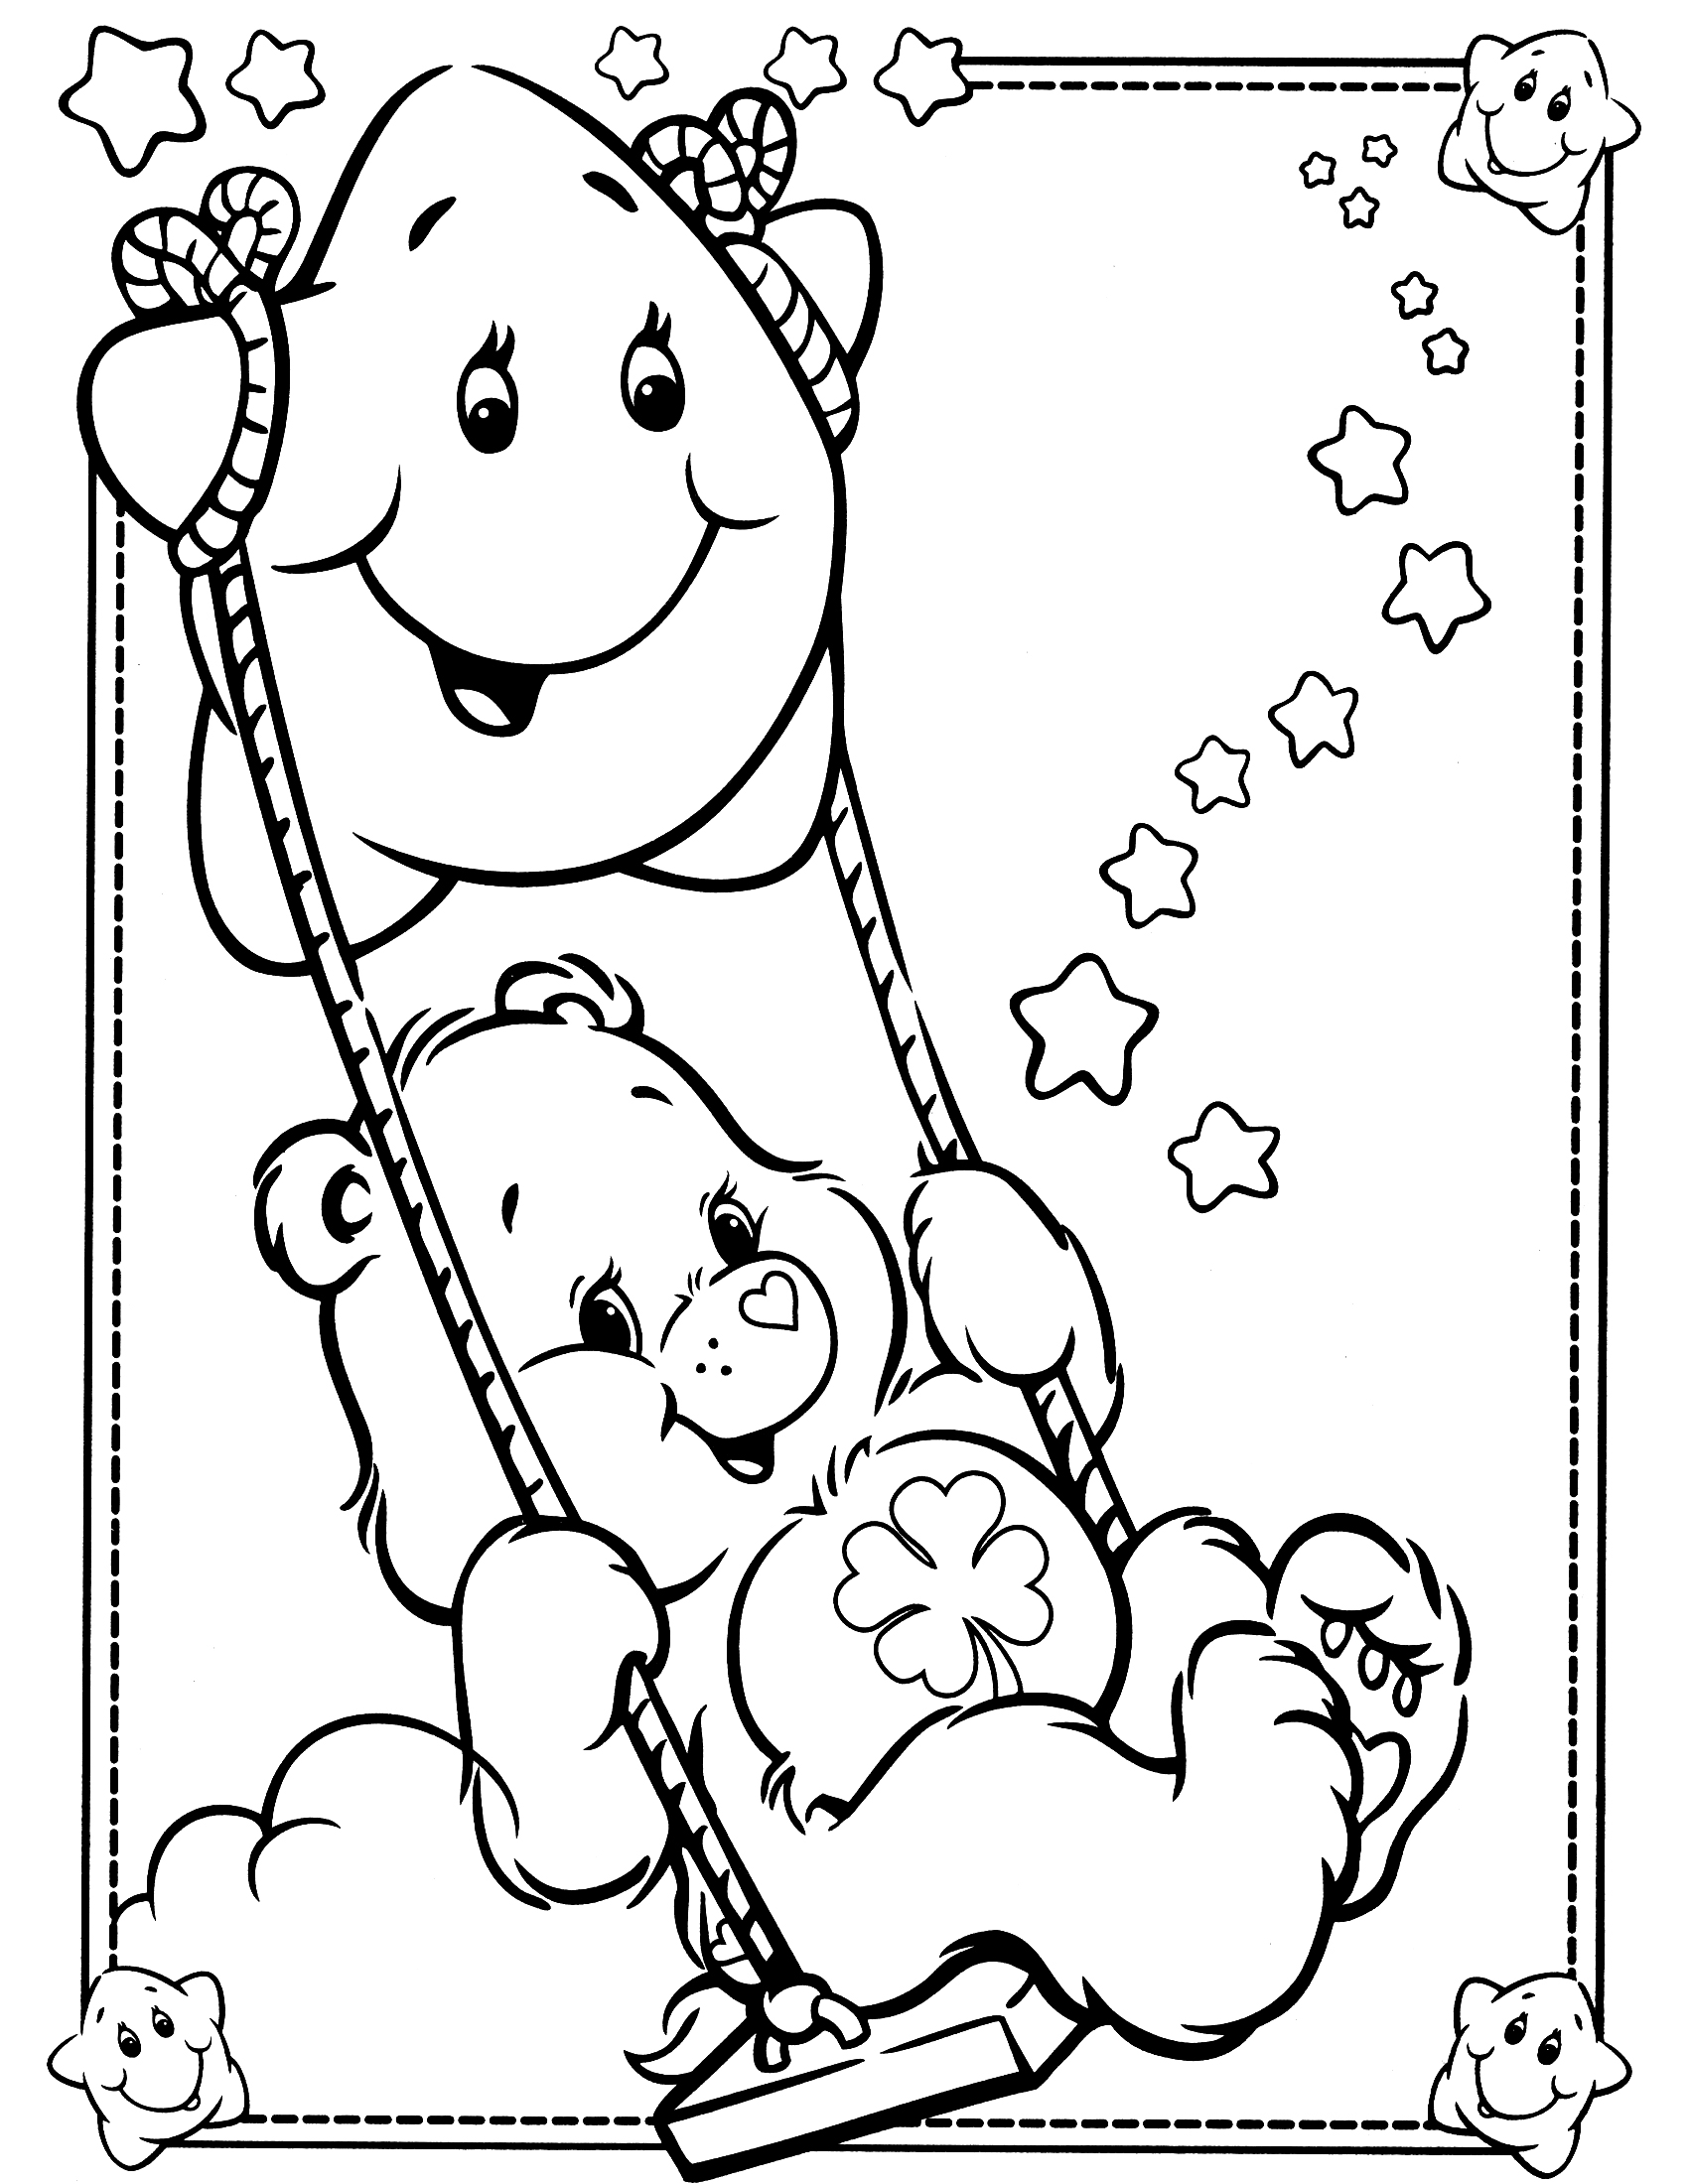 Drawings Care Bears Cartoons – Printable coloring pages